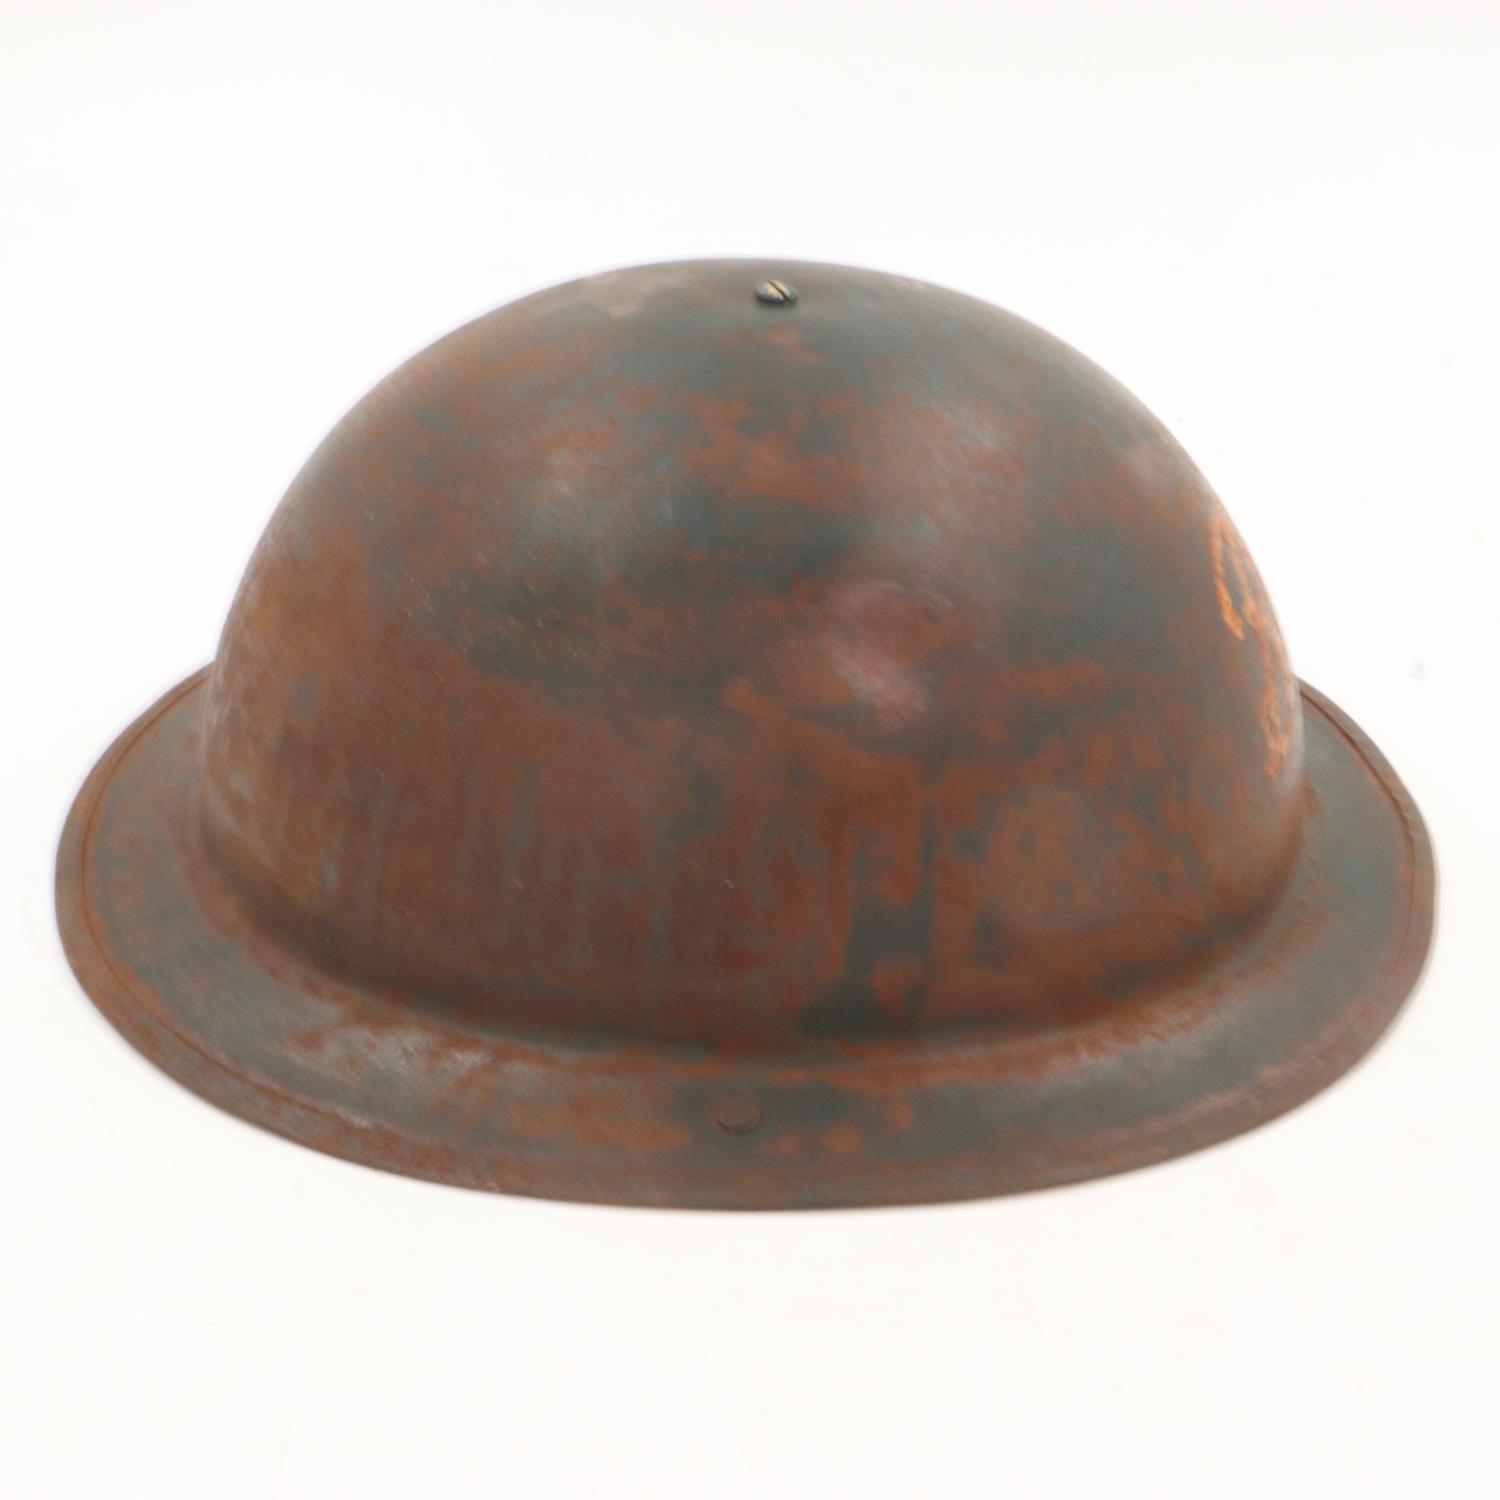 WWII British home front private purchase “Tin Bowler” Helmet for Boots the Chemist Staff. UK P&P - Image 4 of 5